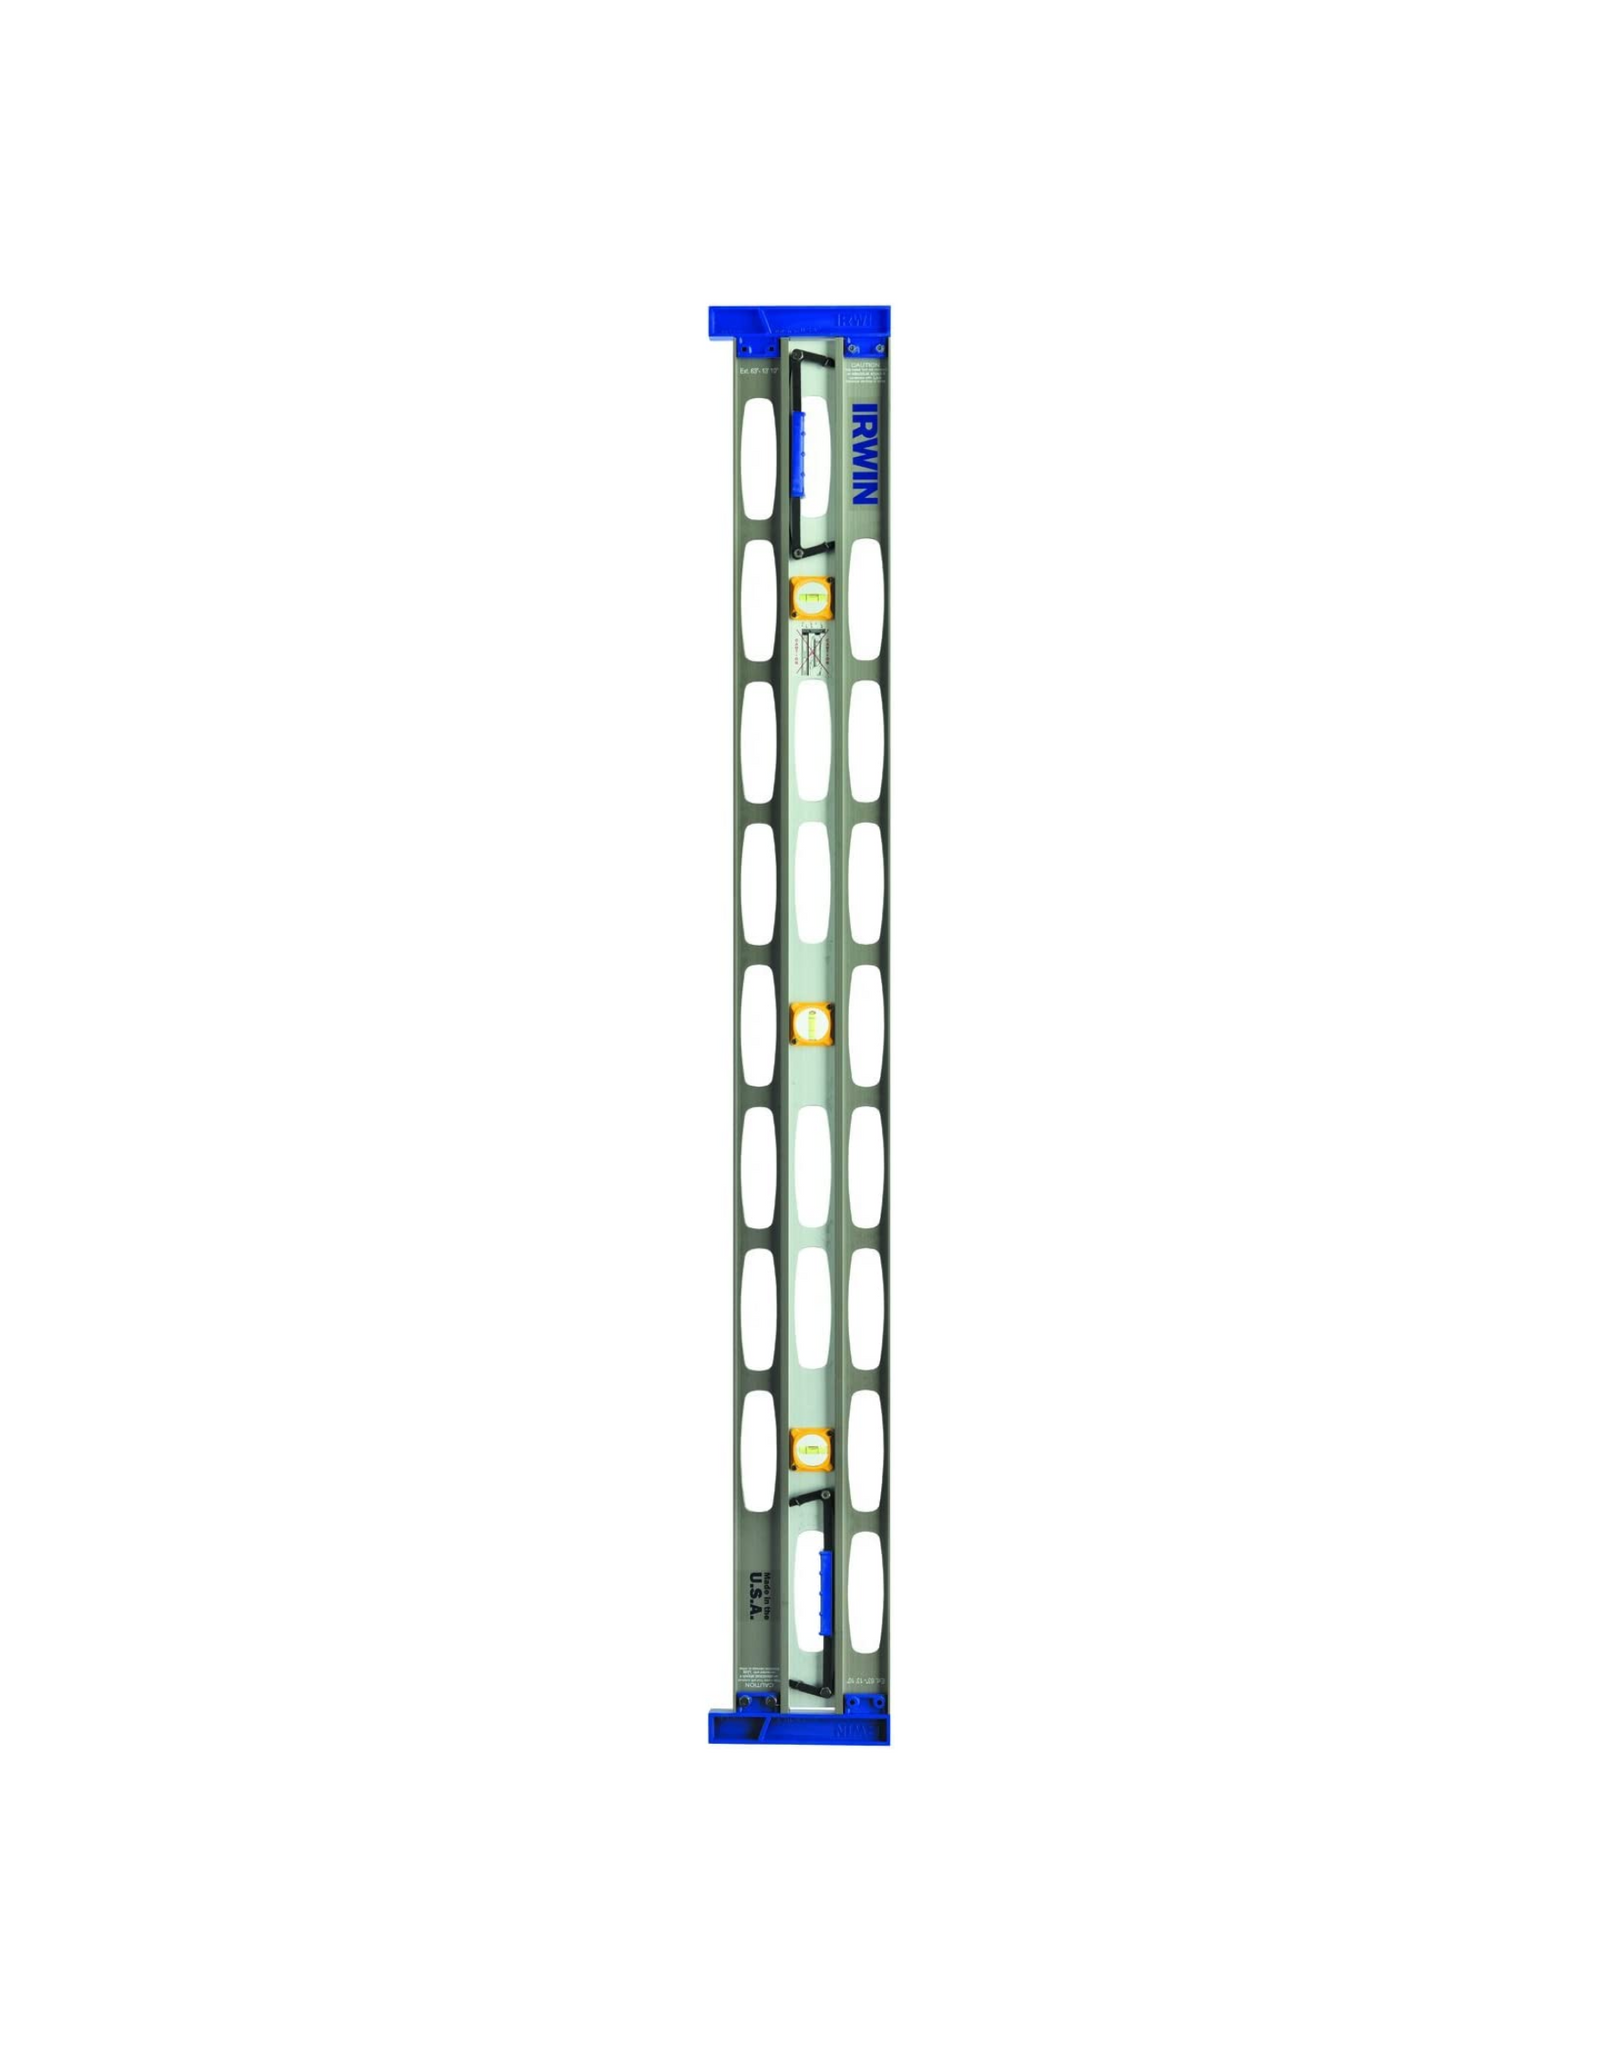 IRWIN Level, Extendable, 5-13 ft, 10 Inch (1801107)